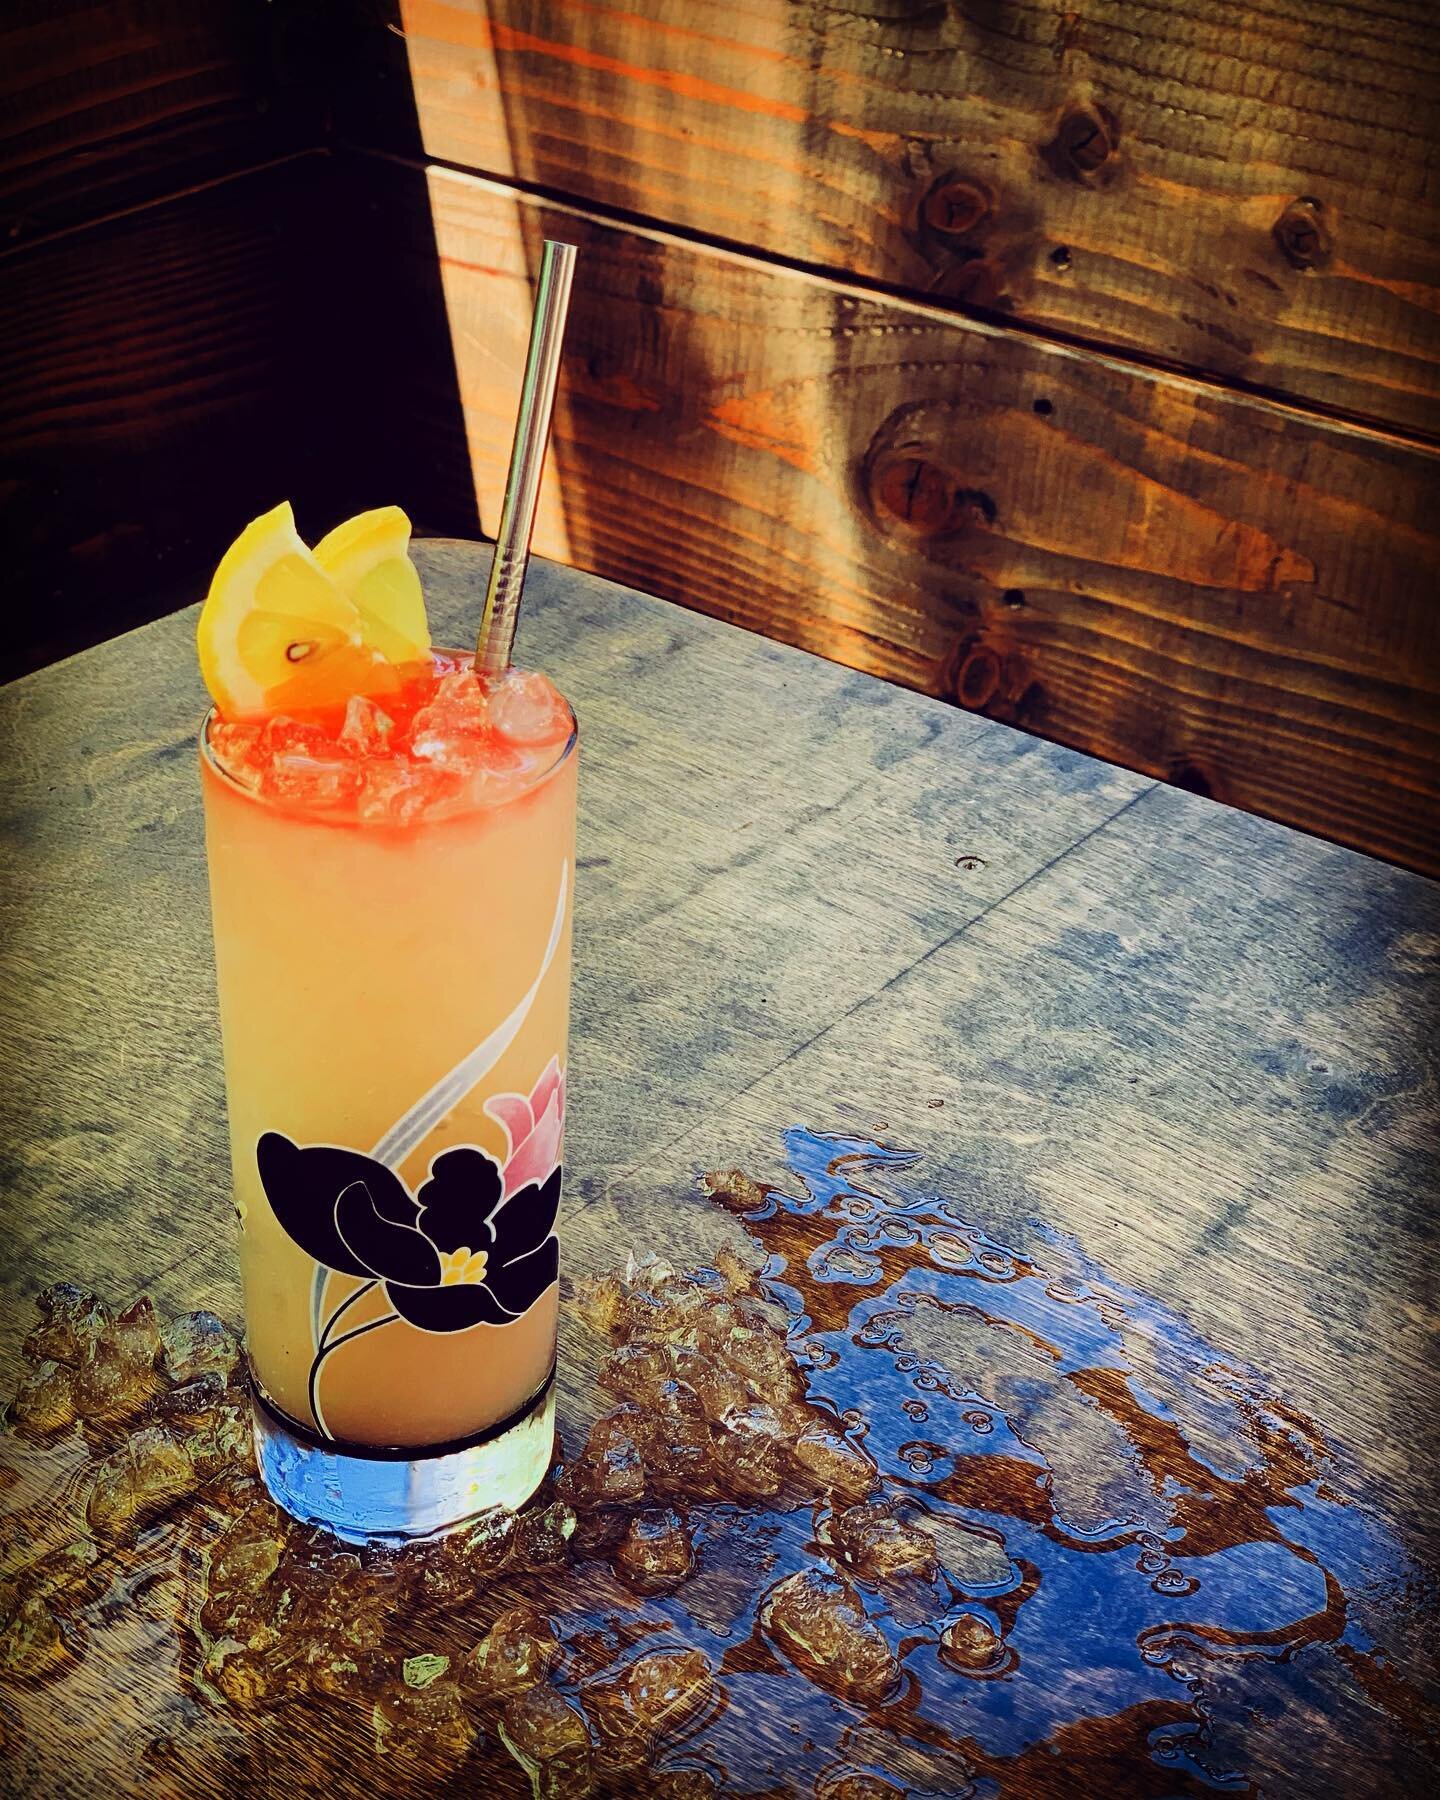 Fog got you down? Missing Summer?  May we offer you a taste of warmer weather in the form of Summertime Sadness, a fruity and refreshing blend of Japanese Whisky and Calvados, white peach, sesame orgeat, dry vermouth, fennel, and lemon on pebble ice.